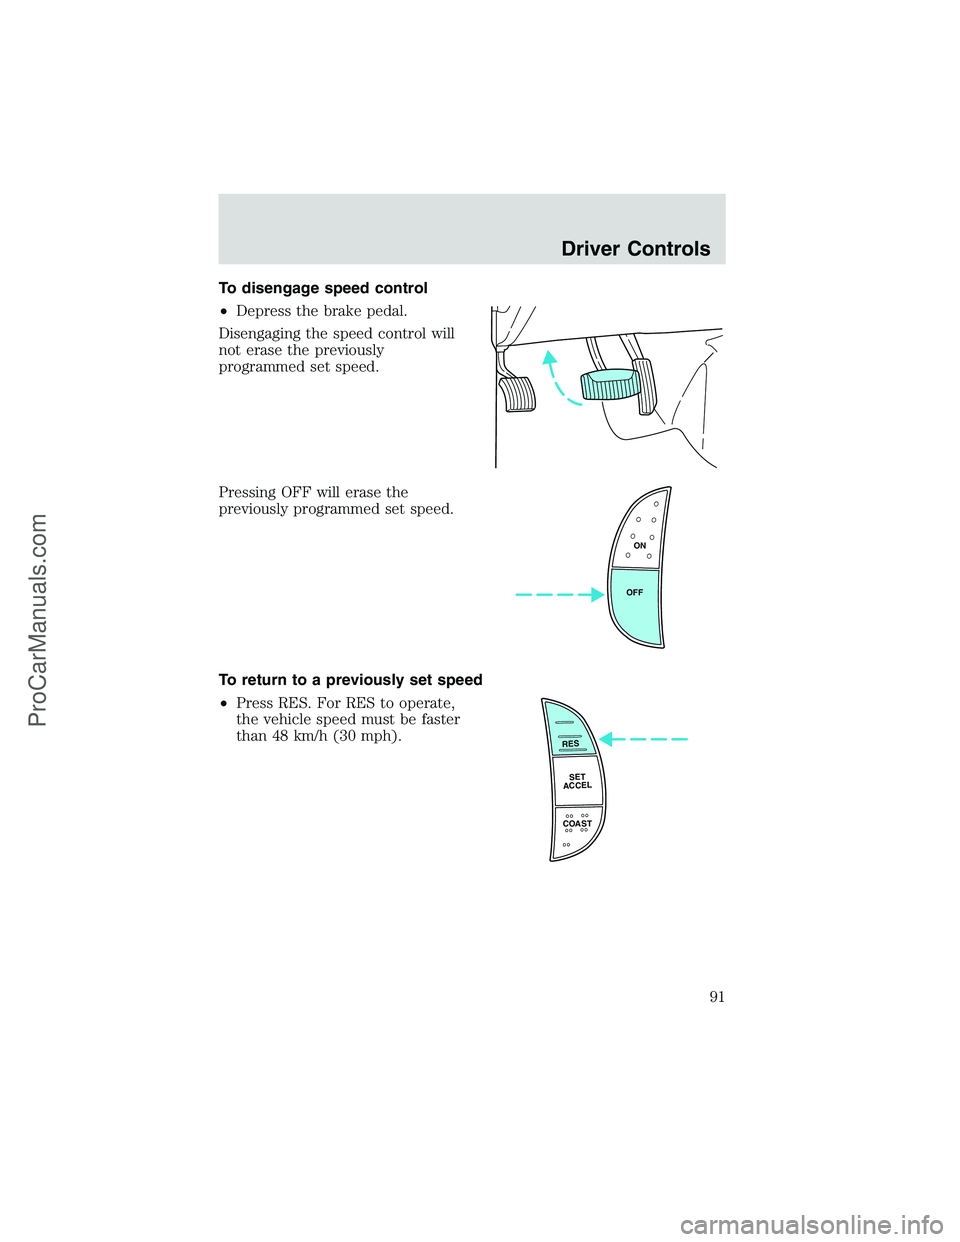 FORD E-250 2002  Owners Manual To disengage speed control
•Depress the brake pedal.
Disengaging the speed control will
not erase the previously
programmed set speed.
Pressing OFF will erase the
previously programmed set speed.
To